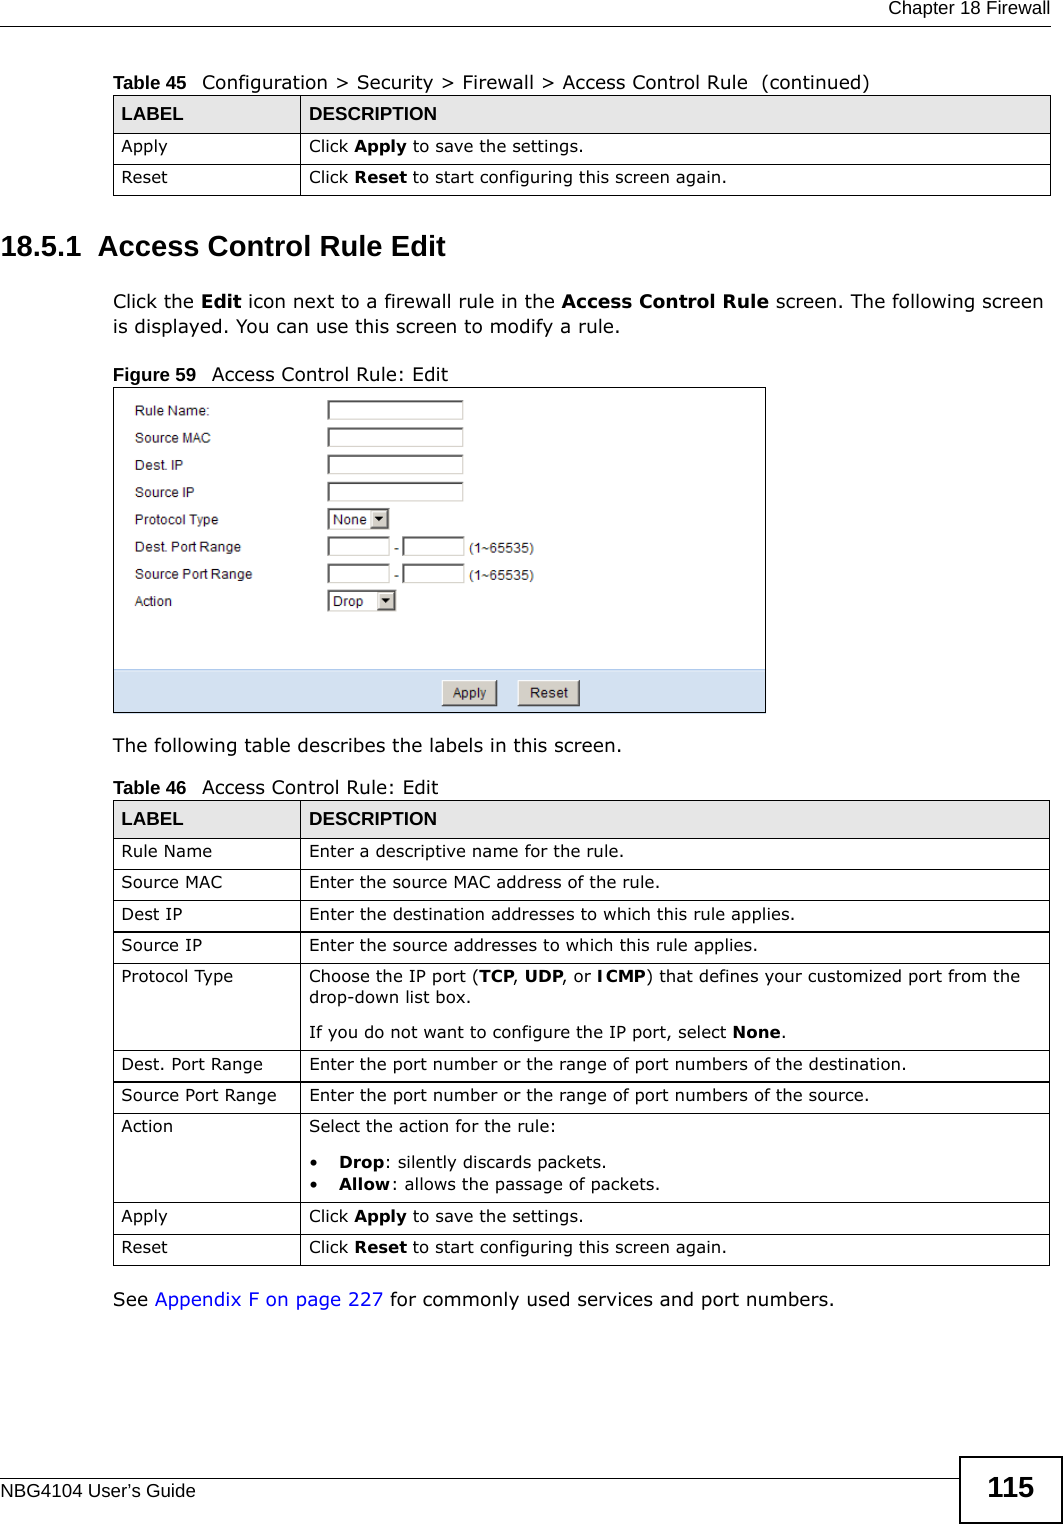  Chapter 18 FirewallNBG4104 User’s Guide 11518.5.1  Access Control Rule Edit Click the Edit icon next to a firewall rule in the Access Control Rule screen. The following screen is displayed. You can use this screen to modify a rule.Figure 59   Access Control Rule: EditThe following table describes the labels in this screen.See Appendix F on page 227 for commonly used services and port numbers.Apply Click Apply to save the settings. Reset Click Reset to start configuring this screen again. Table 45   Configuration &gt; Security &gt; Firewall &gt; Access Control Rule  (continued)LABEL DESCRIPTIONTable 46   Access Control Rule: EditLABEL DESCRIPTIONRule Name Enter a descriptive name for the rule.Source MAC Enter the source MAC address of the rule.Dest IP Enter the destination addresses to which this rule applies.Source IP Enter the source addresses to which this rule applies.Protocol Type Choose the IP port (TCP, UDP, or ICMP) that defines your customized port from the drop-down list box.If you do not want to configure the IP port, select None.Dest. Port Range Enter the port number or the range of port numbers of the destination.Source Port Range Enter the port number or the range of port numbers of the source.Action Select the action for the rule: •Drop: silently discards packets. •Allow: allows the passage of packets.Apply Click Apply to save the settings. Reset Click Reset to start configuring this screen again. 